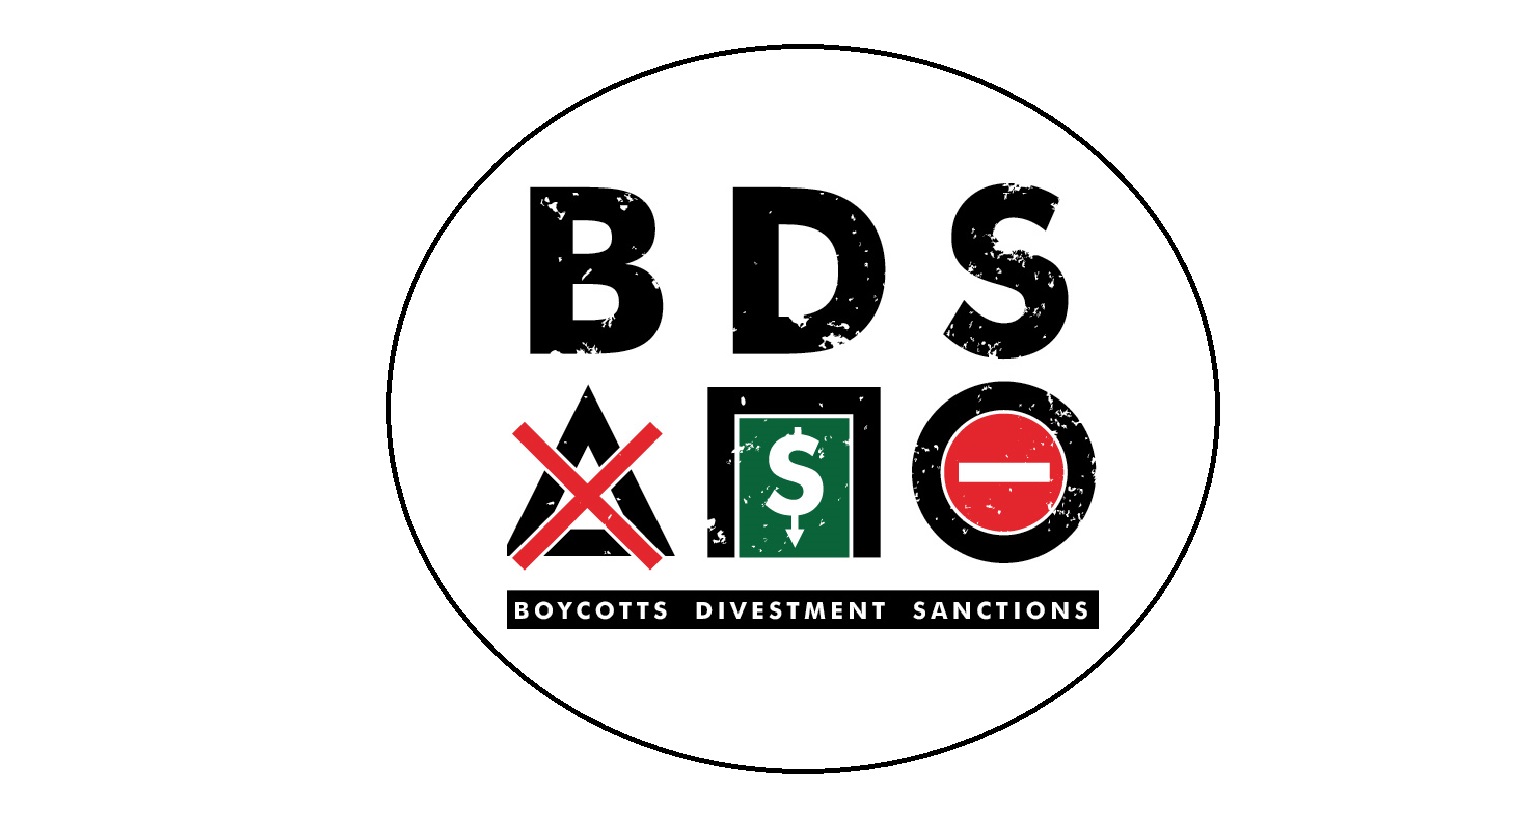 In conversation: Is there a place for BDS on campus?